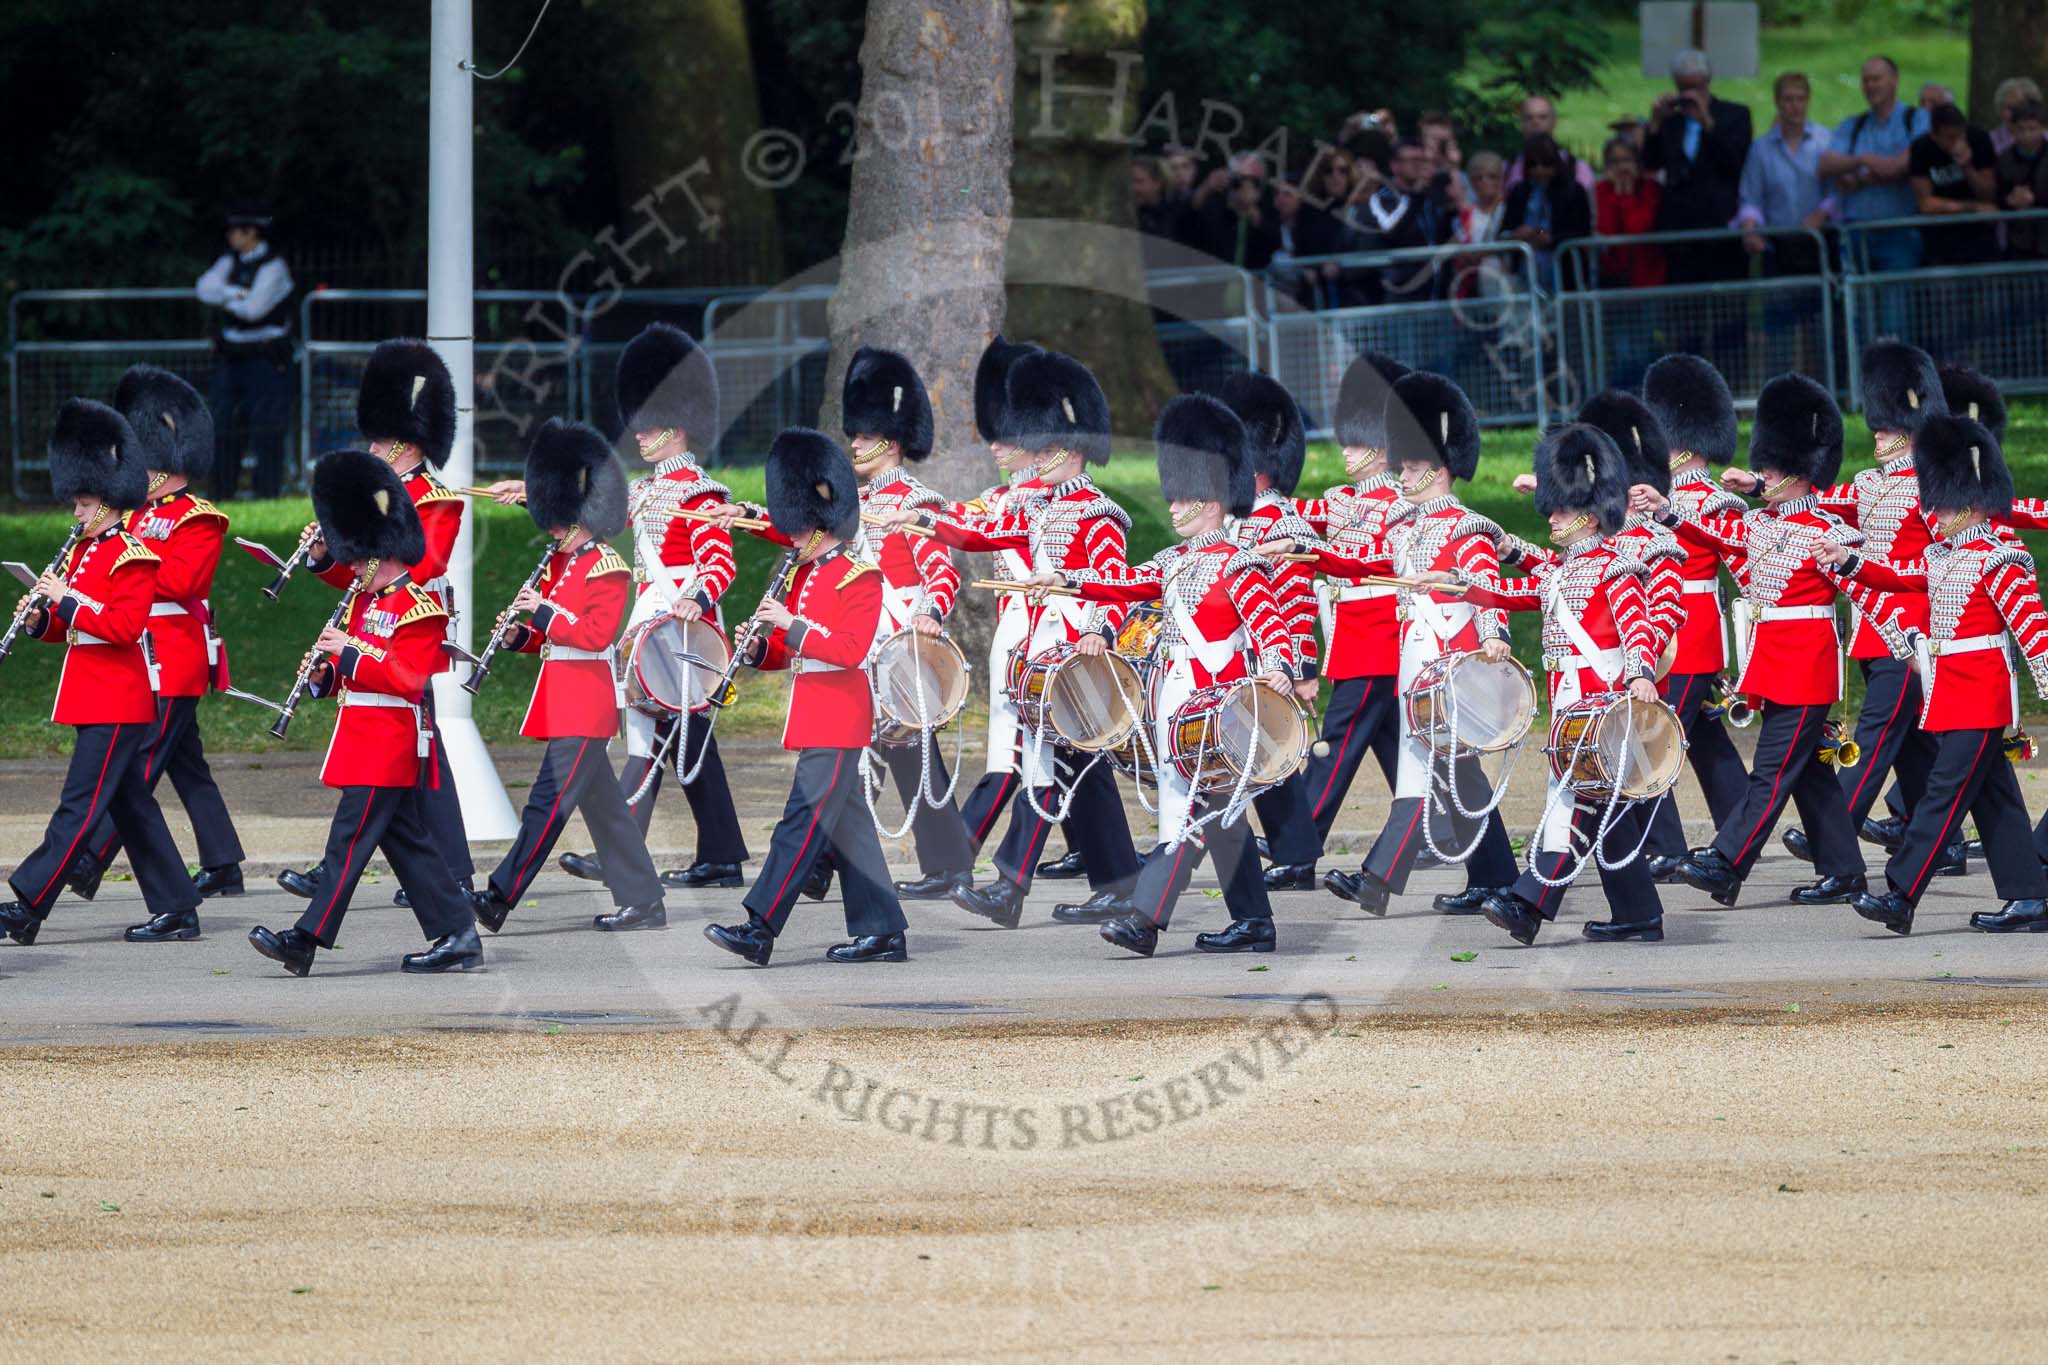 The Colonel's Review 2015.
Horse Guards Parade, Westminster,
London,

United Kingdom,
on 06 June 2015 at 10:27, image #67